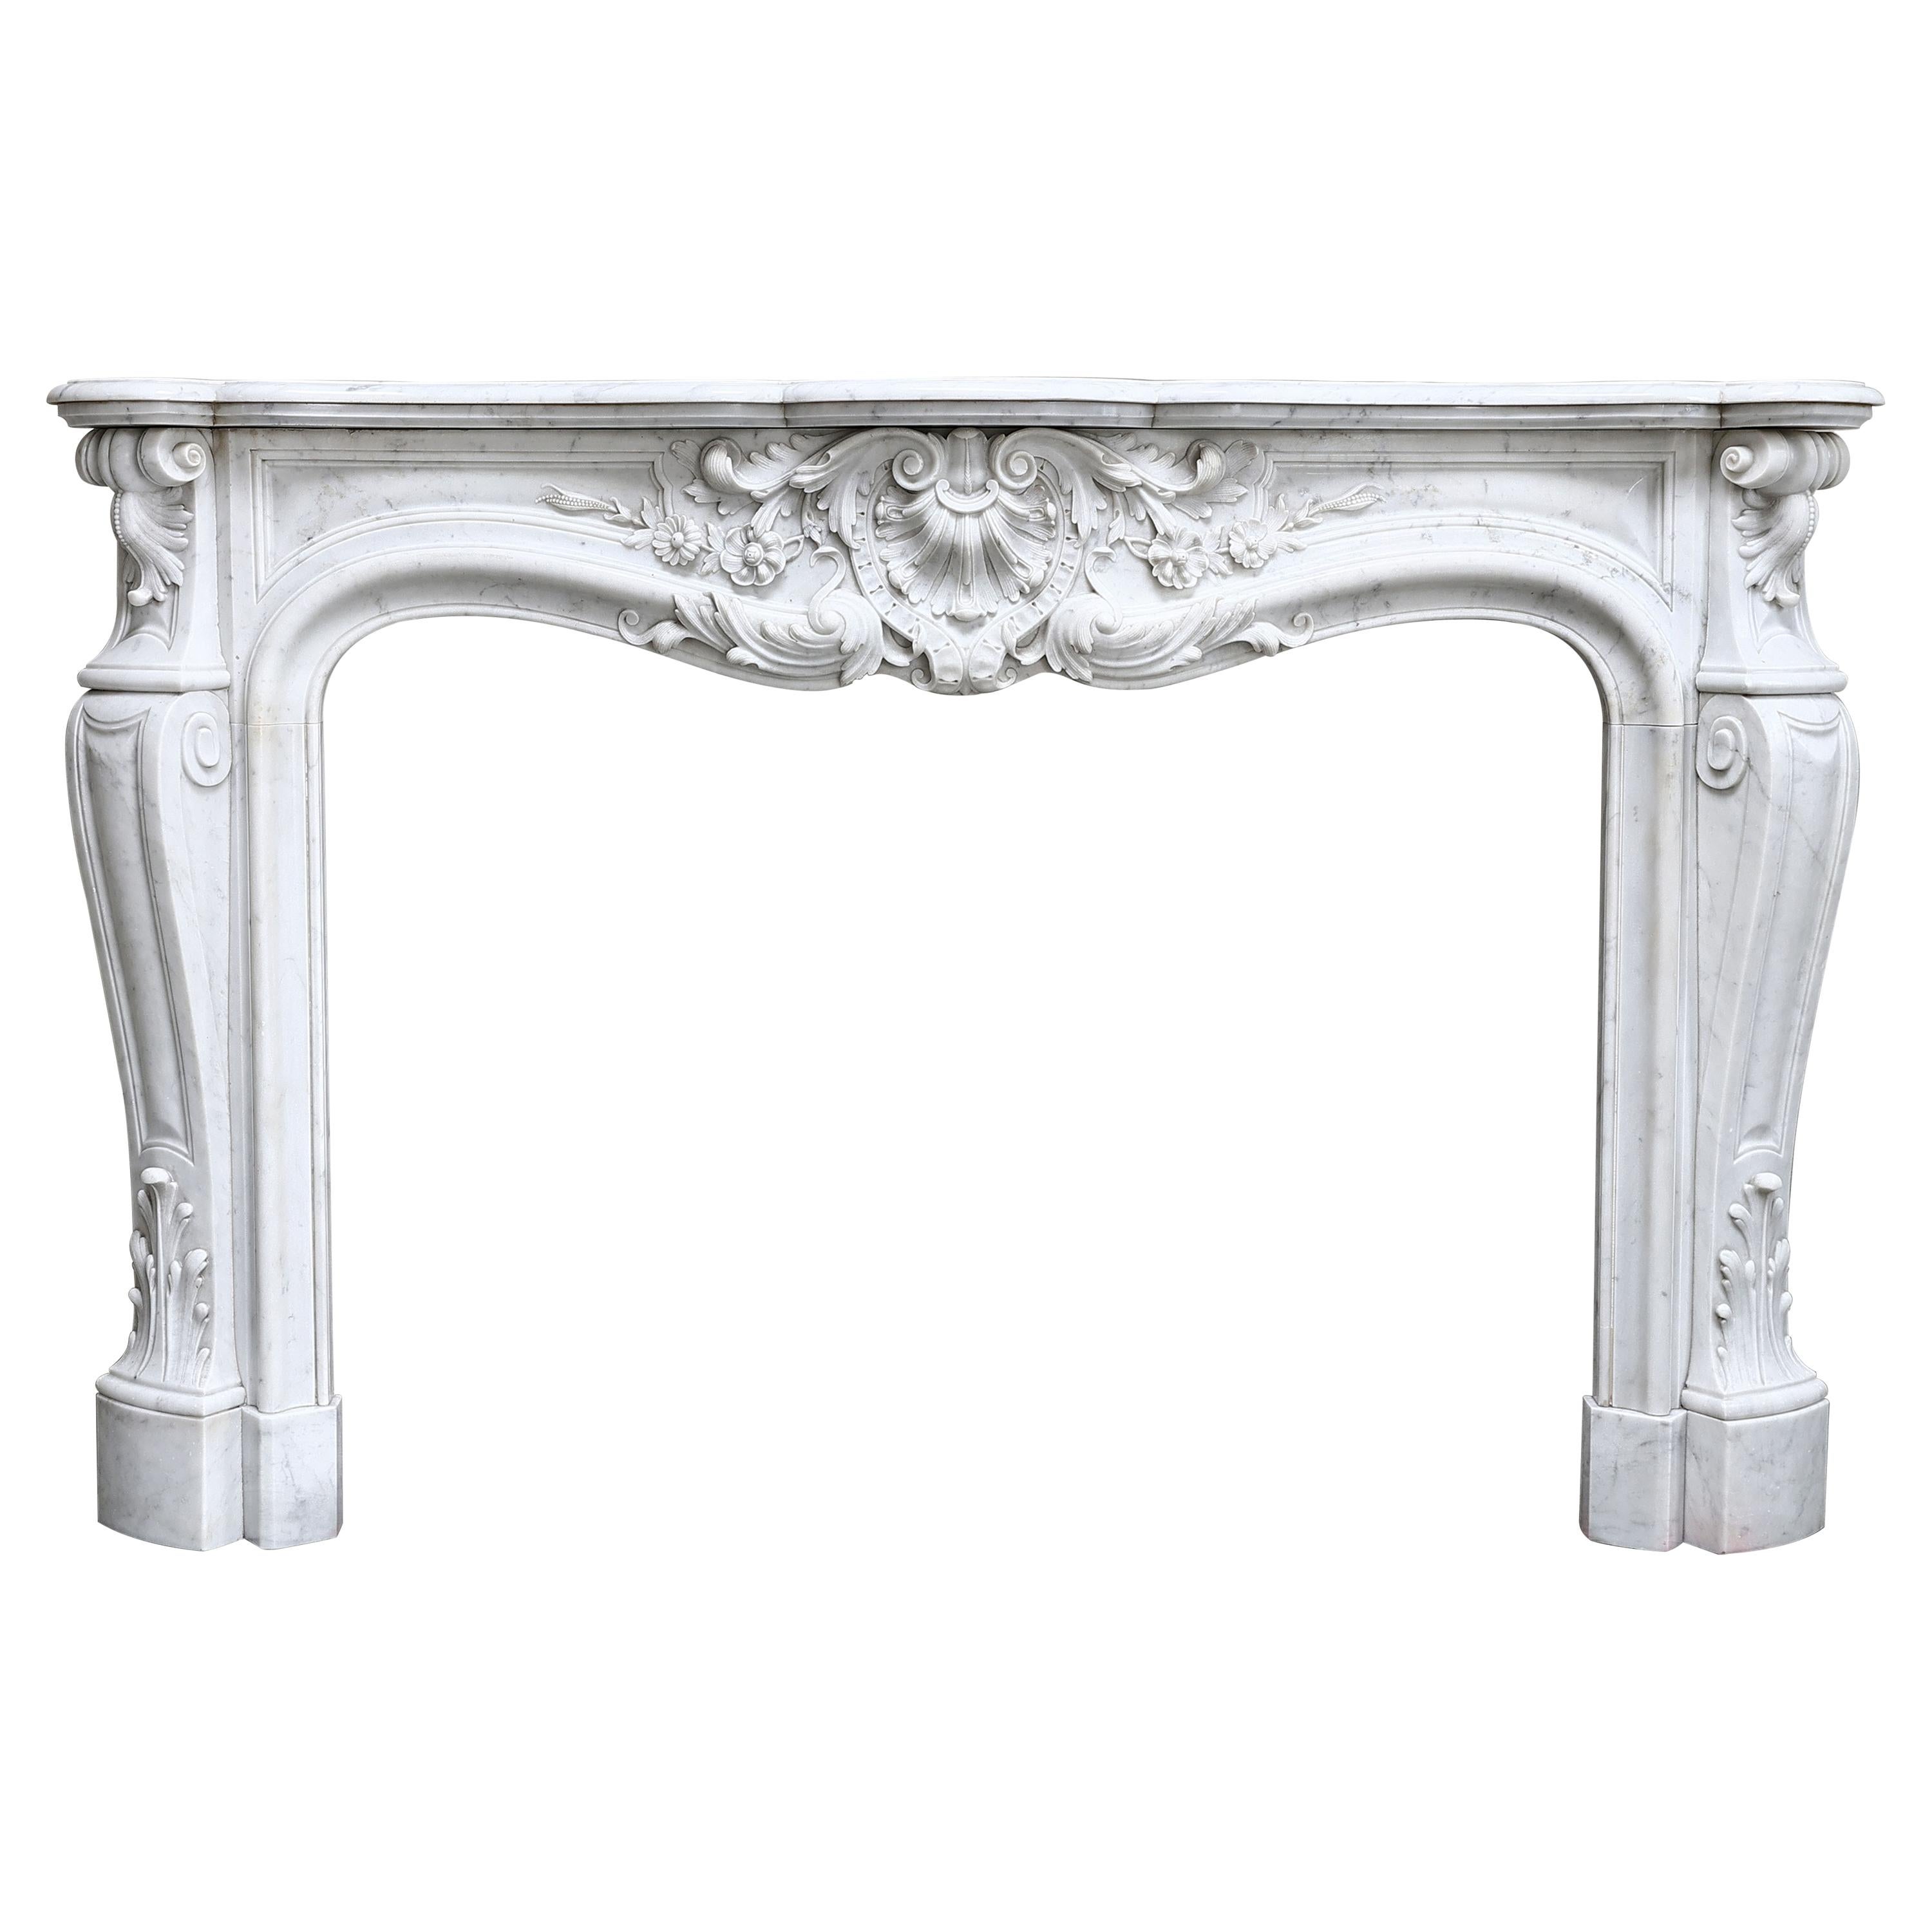 Antique Marble Fireplace  Carrara Marble  19th Century  Monumental For Sale